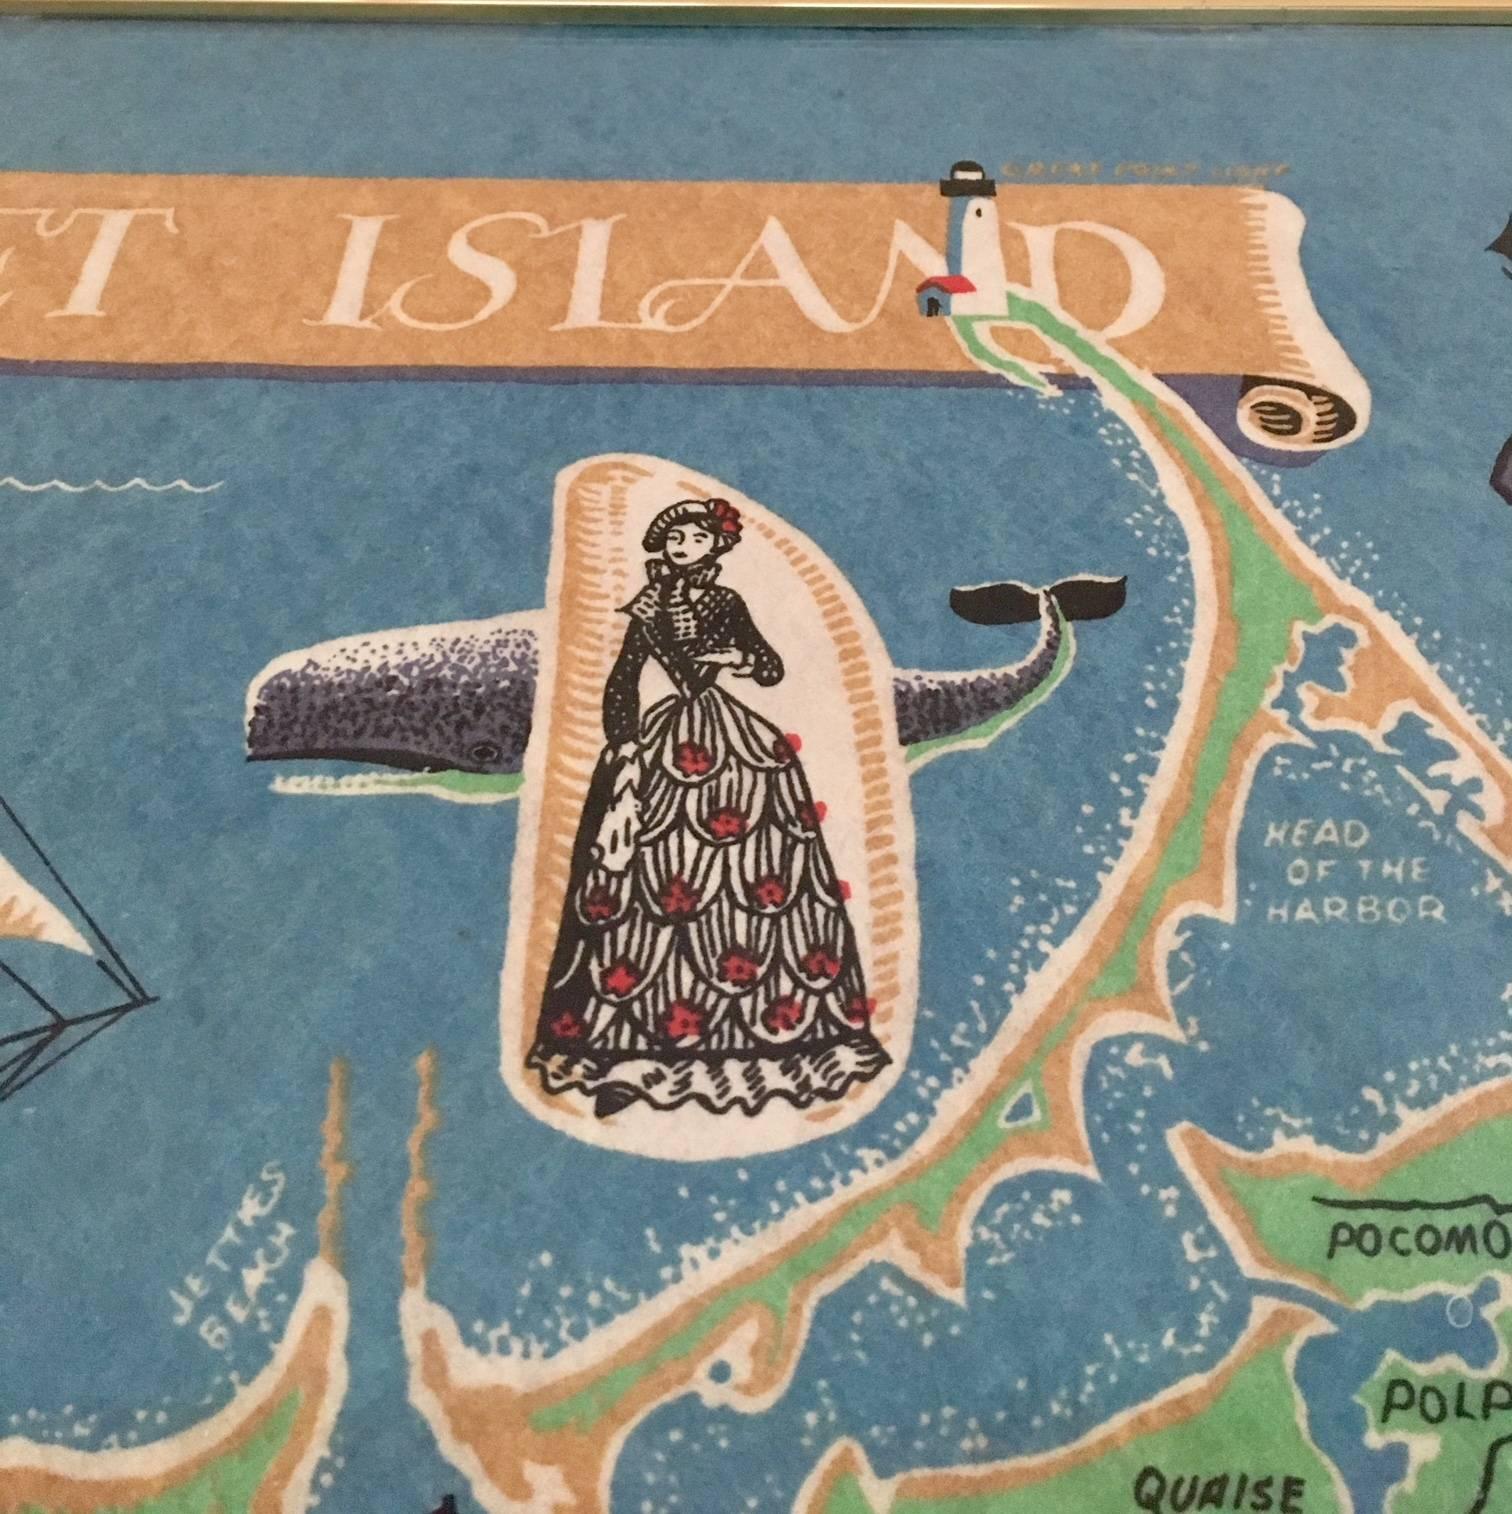 Folk Art Hand Colored Map of Nantucket by Sol Levenson, 1981